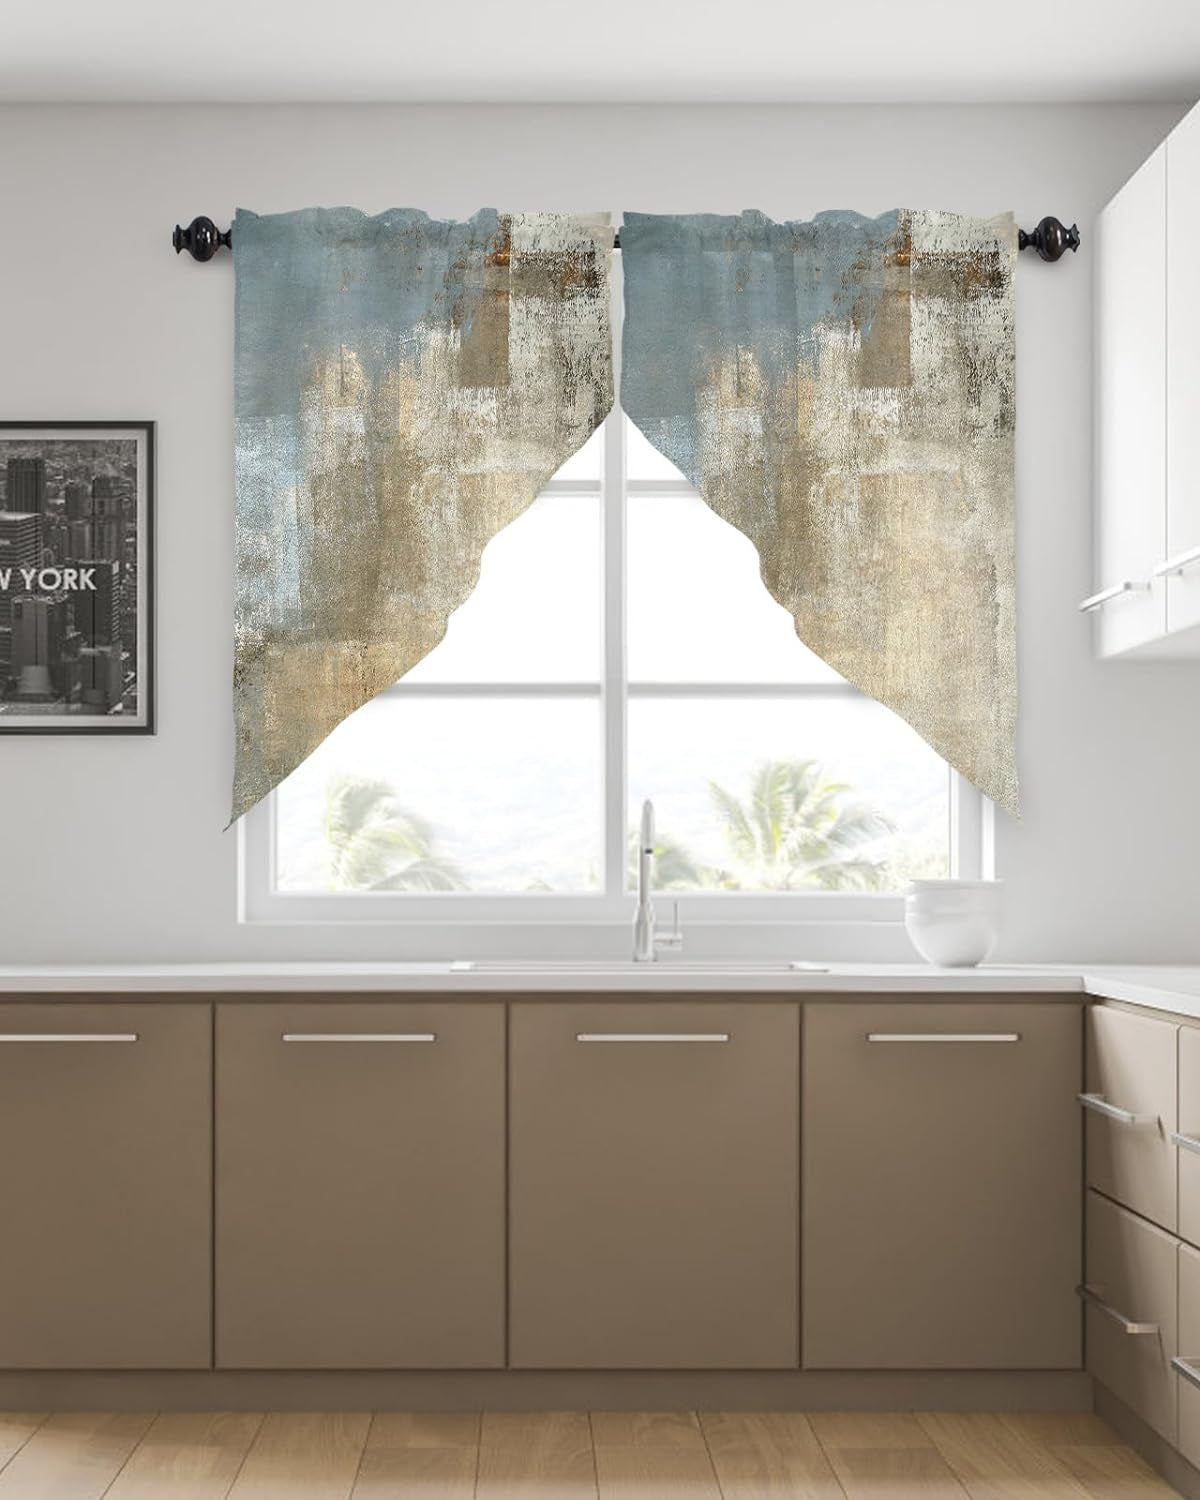 Abstract Swag Valance Curtains Retro Rustic Country Style Farmhouse Art Oil Painting Rod Pocket Kitchen Curtains Scalloped Window Treatment Valances Swag Curtains for Living Room, 1 Pair, 28"W X 36"L